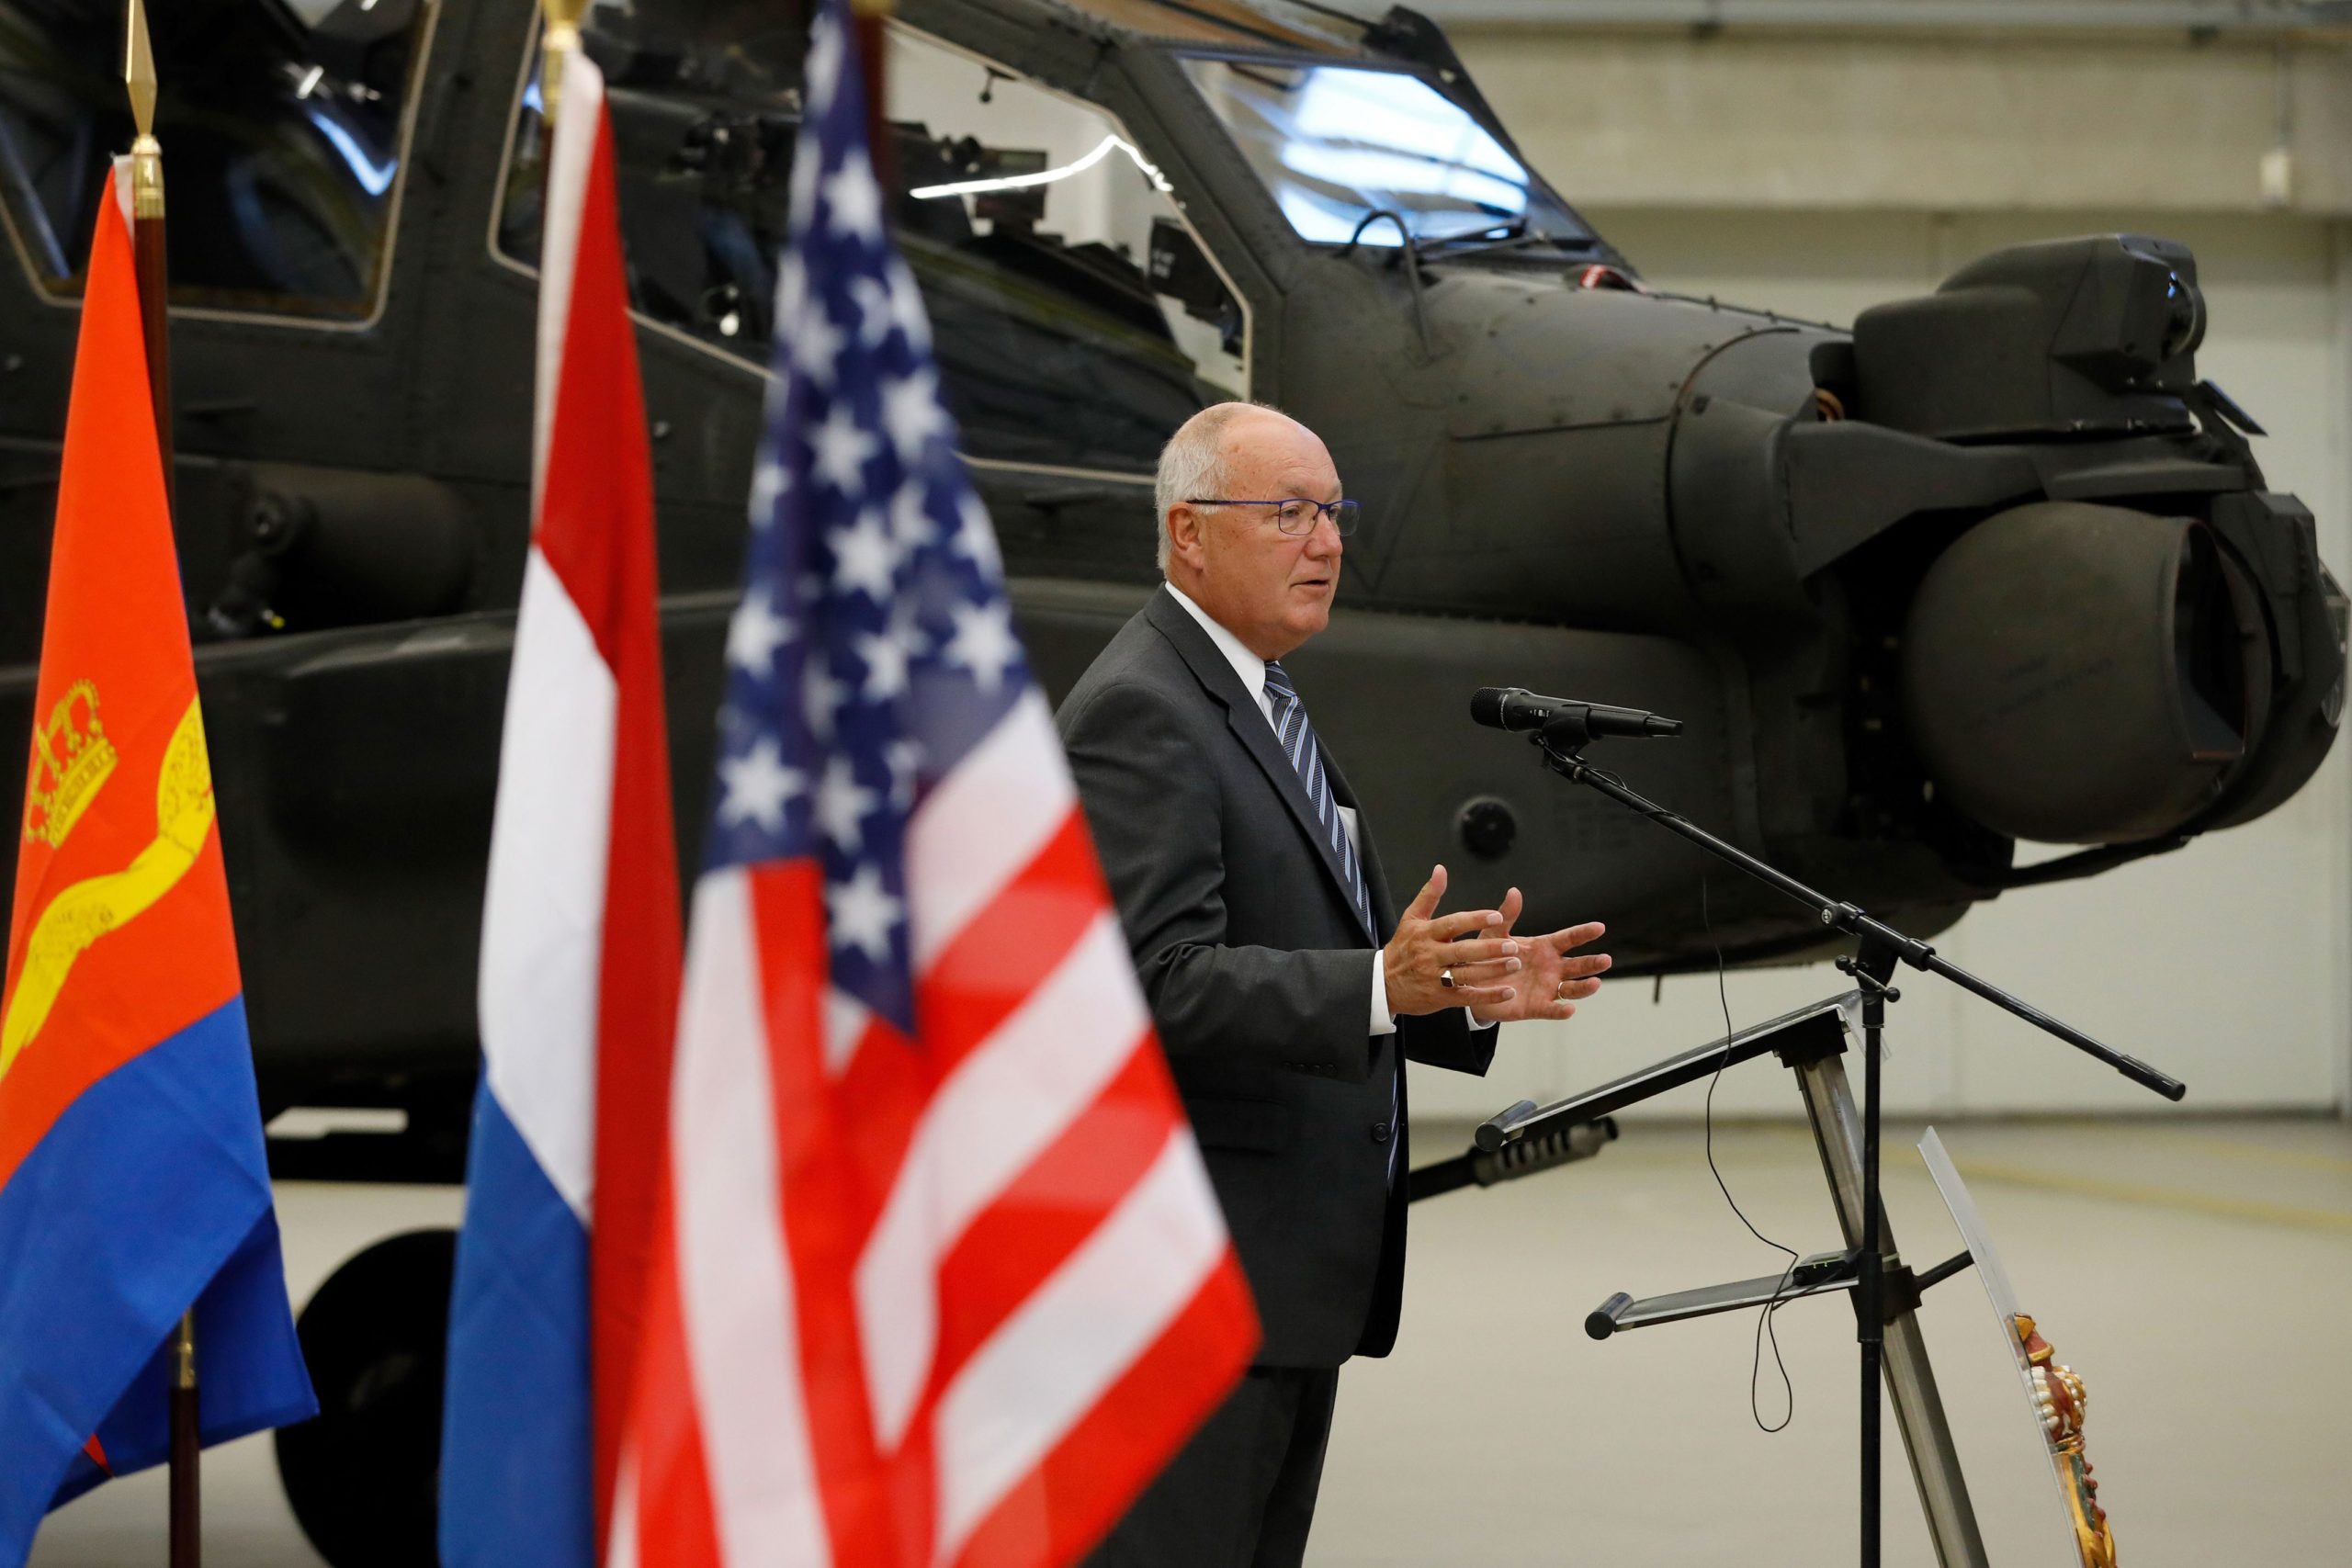 US ambassador Pete Hoekstra speaks at airbase Gilze-Rijen during a signing ceremony for the upgrate of 28 Apache helicopters of the Royal Airforce at Gilze Rijen, on September 14, 2018. (Photo by Bas CZERWINSKI / ANP / AFP) / Netherlands OUT (Photo credit should read BAS CZERWINSKI/AFP via Getty Images)